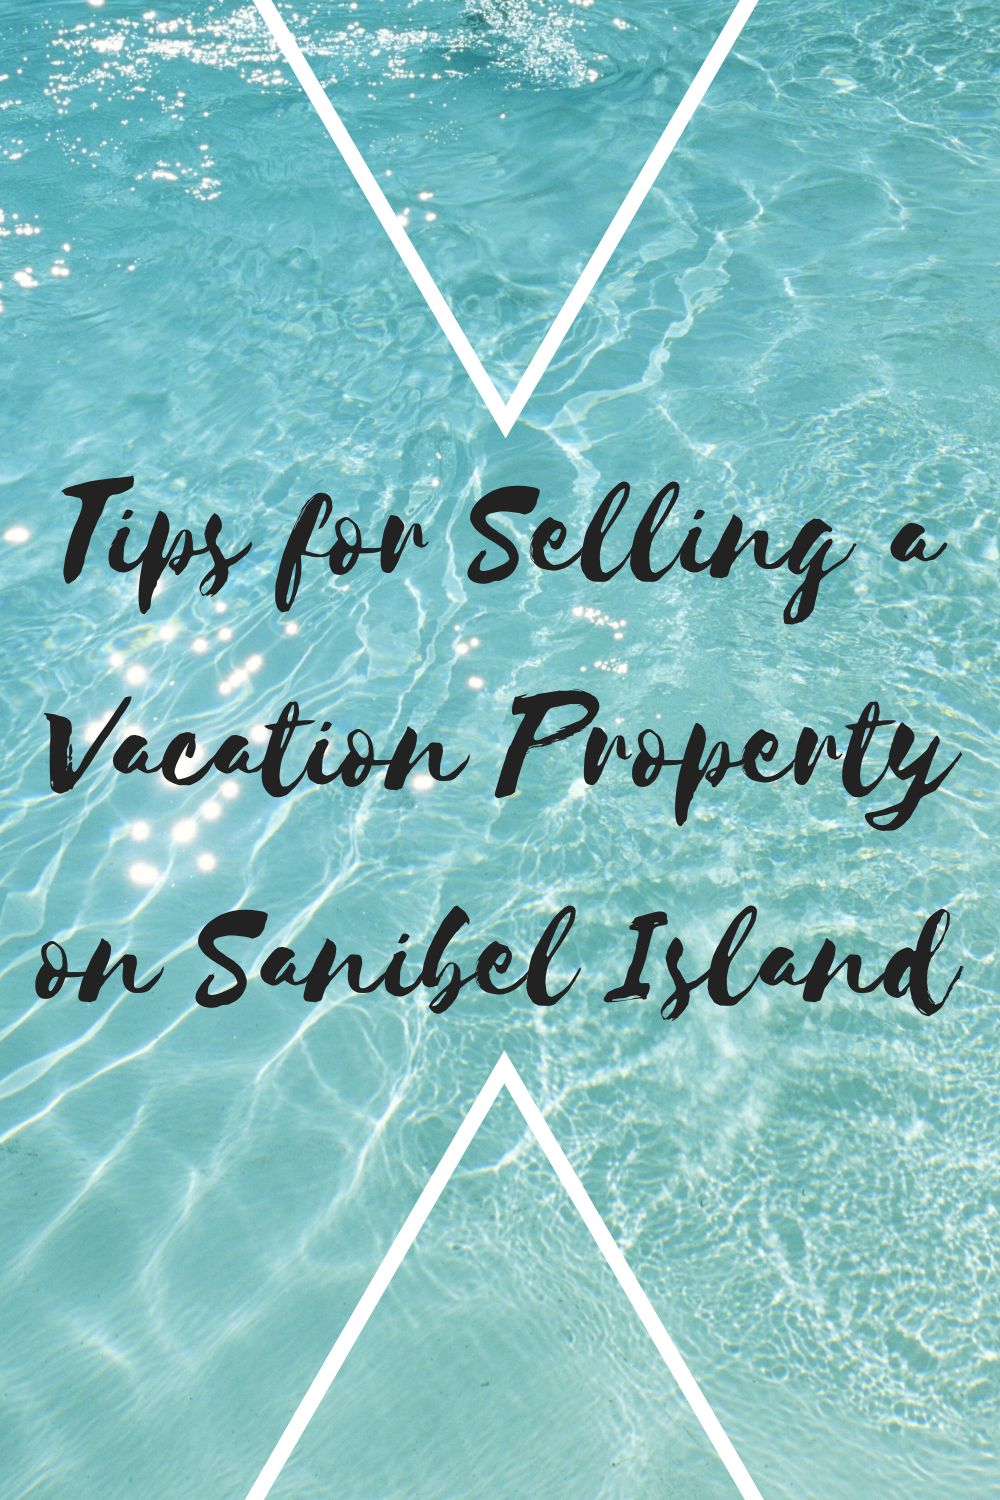 Tips for Selling a Vacation Property on Sanibel Island